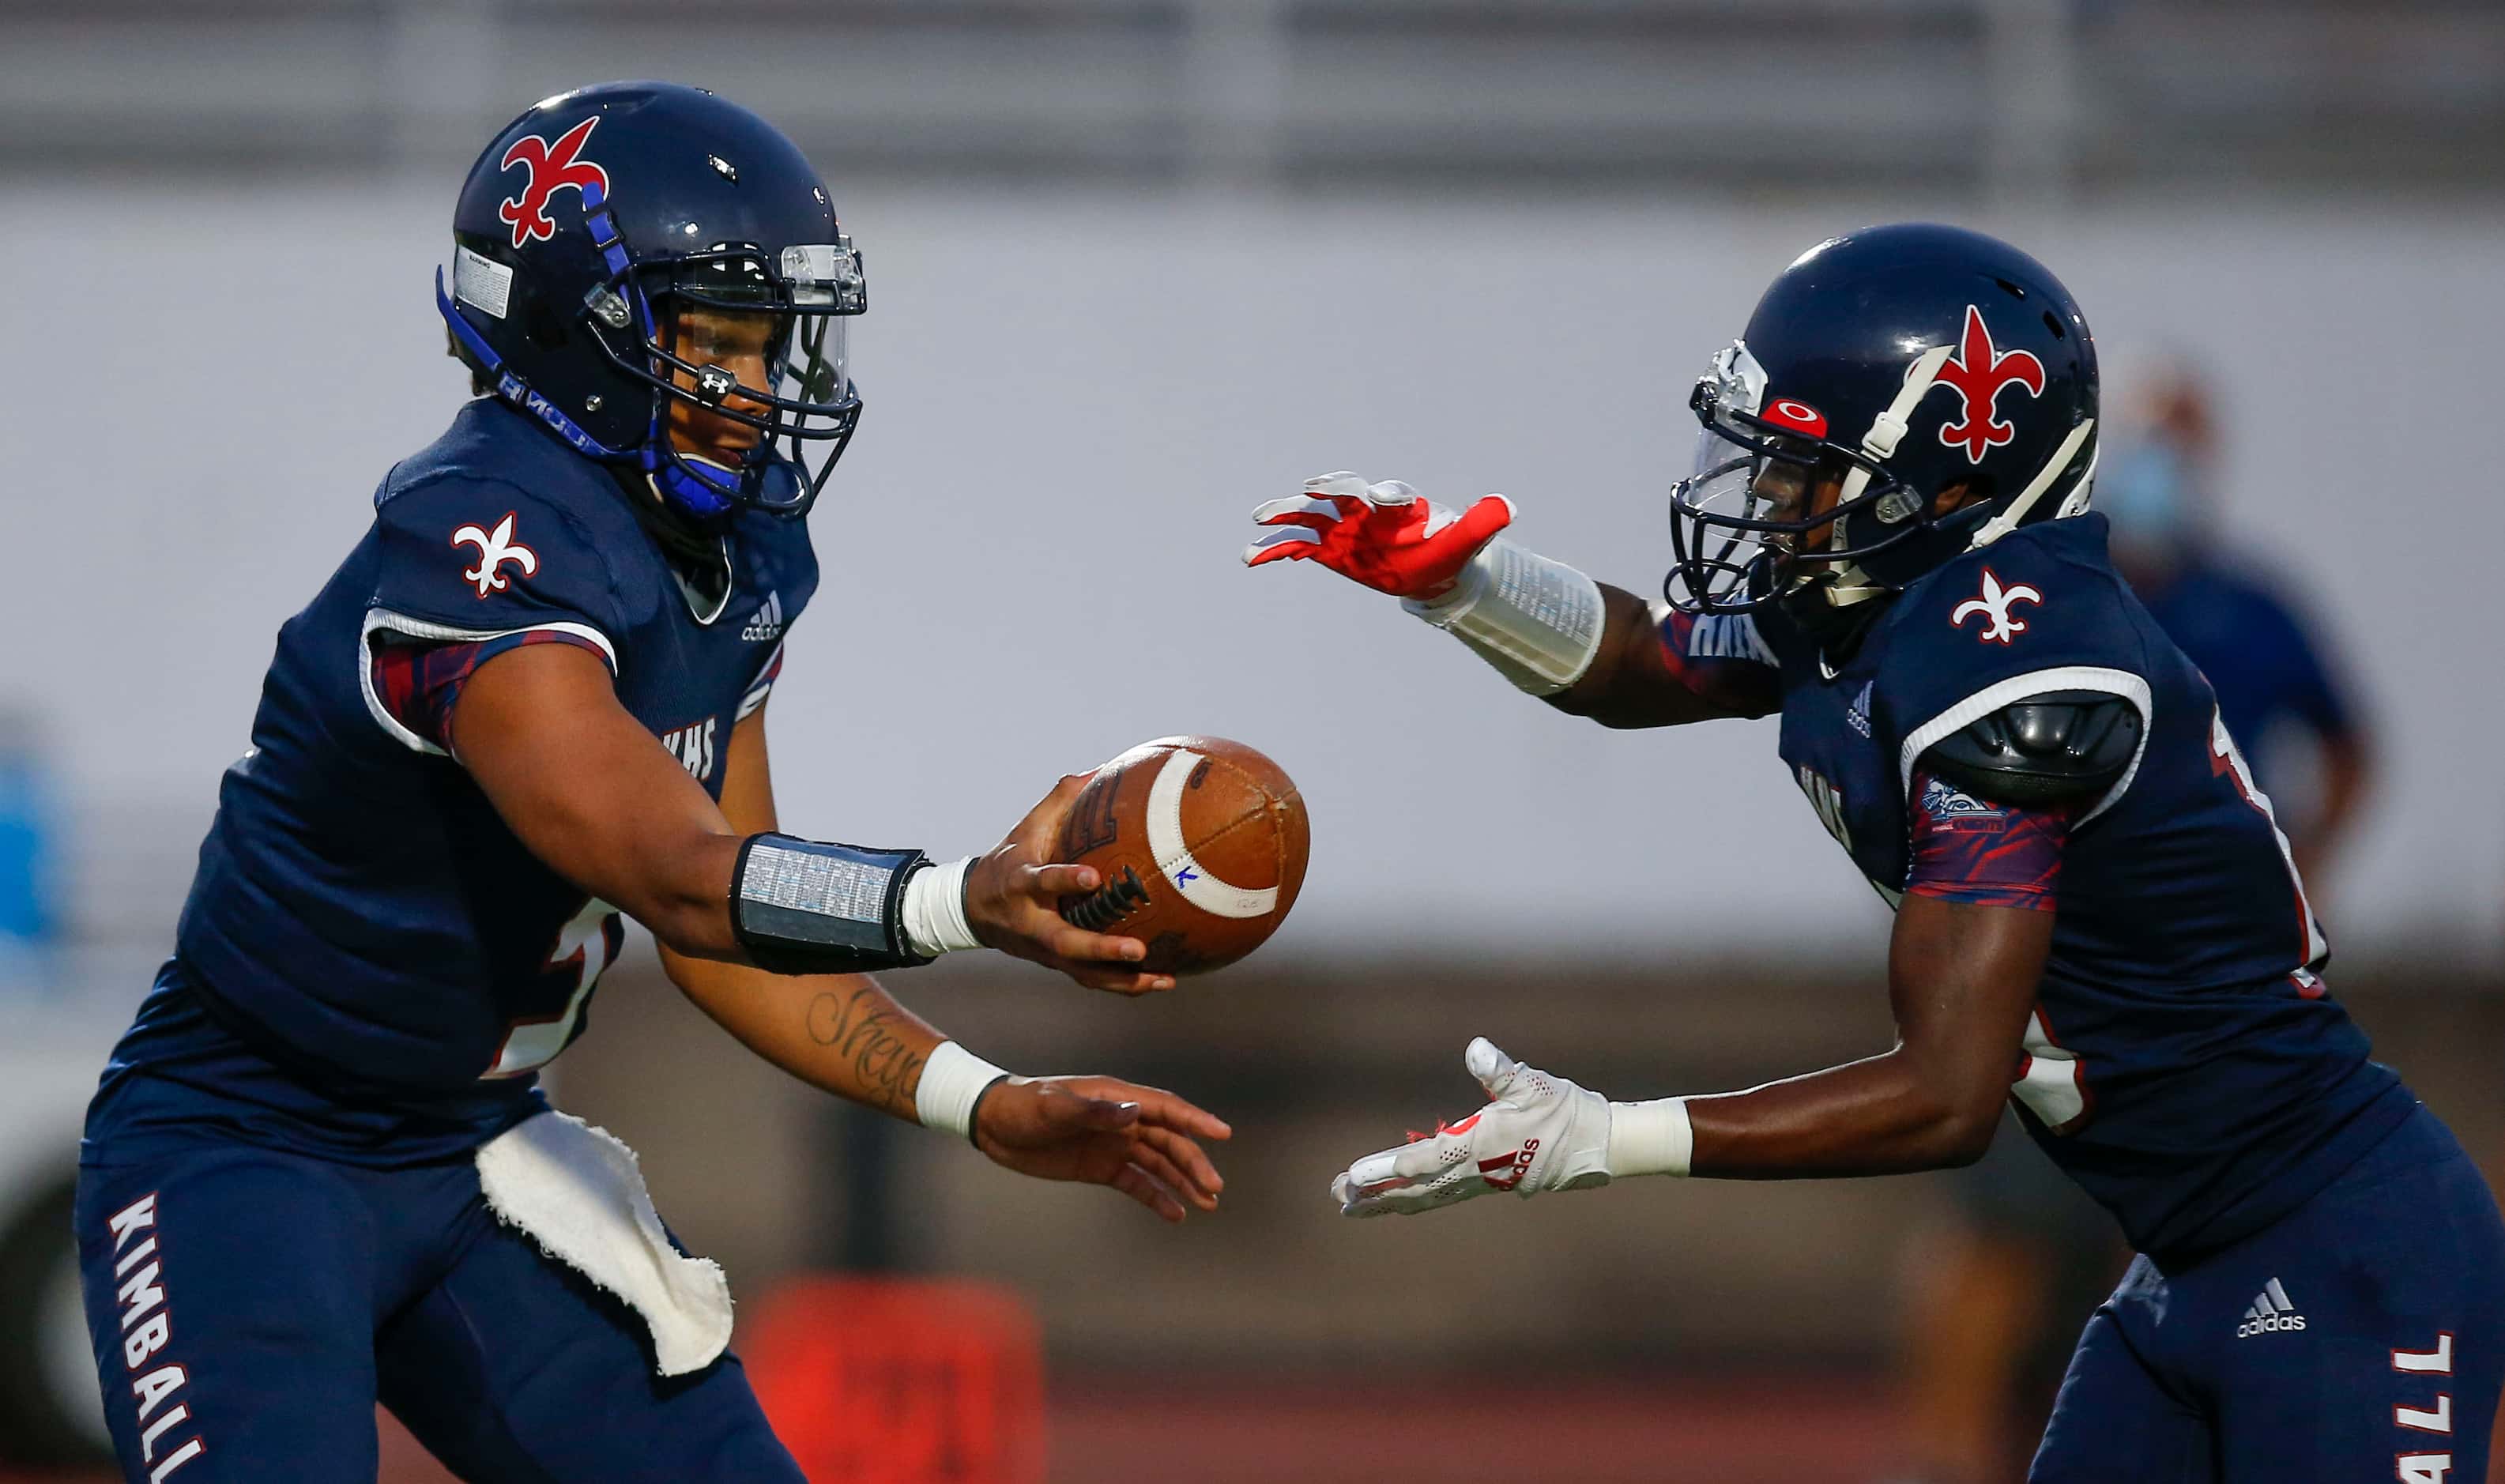 Kimball sophomore quarterback Jacarion Sauls, left, hands the ball off to junior running...